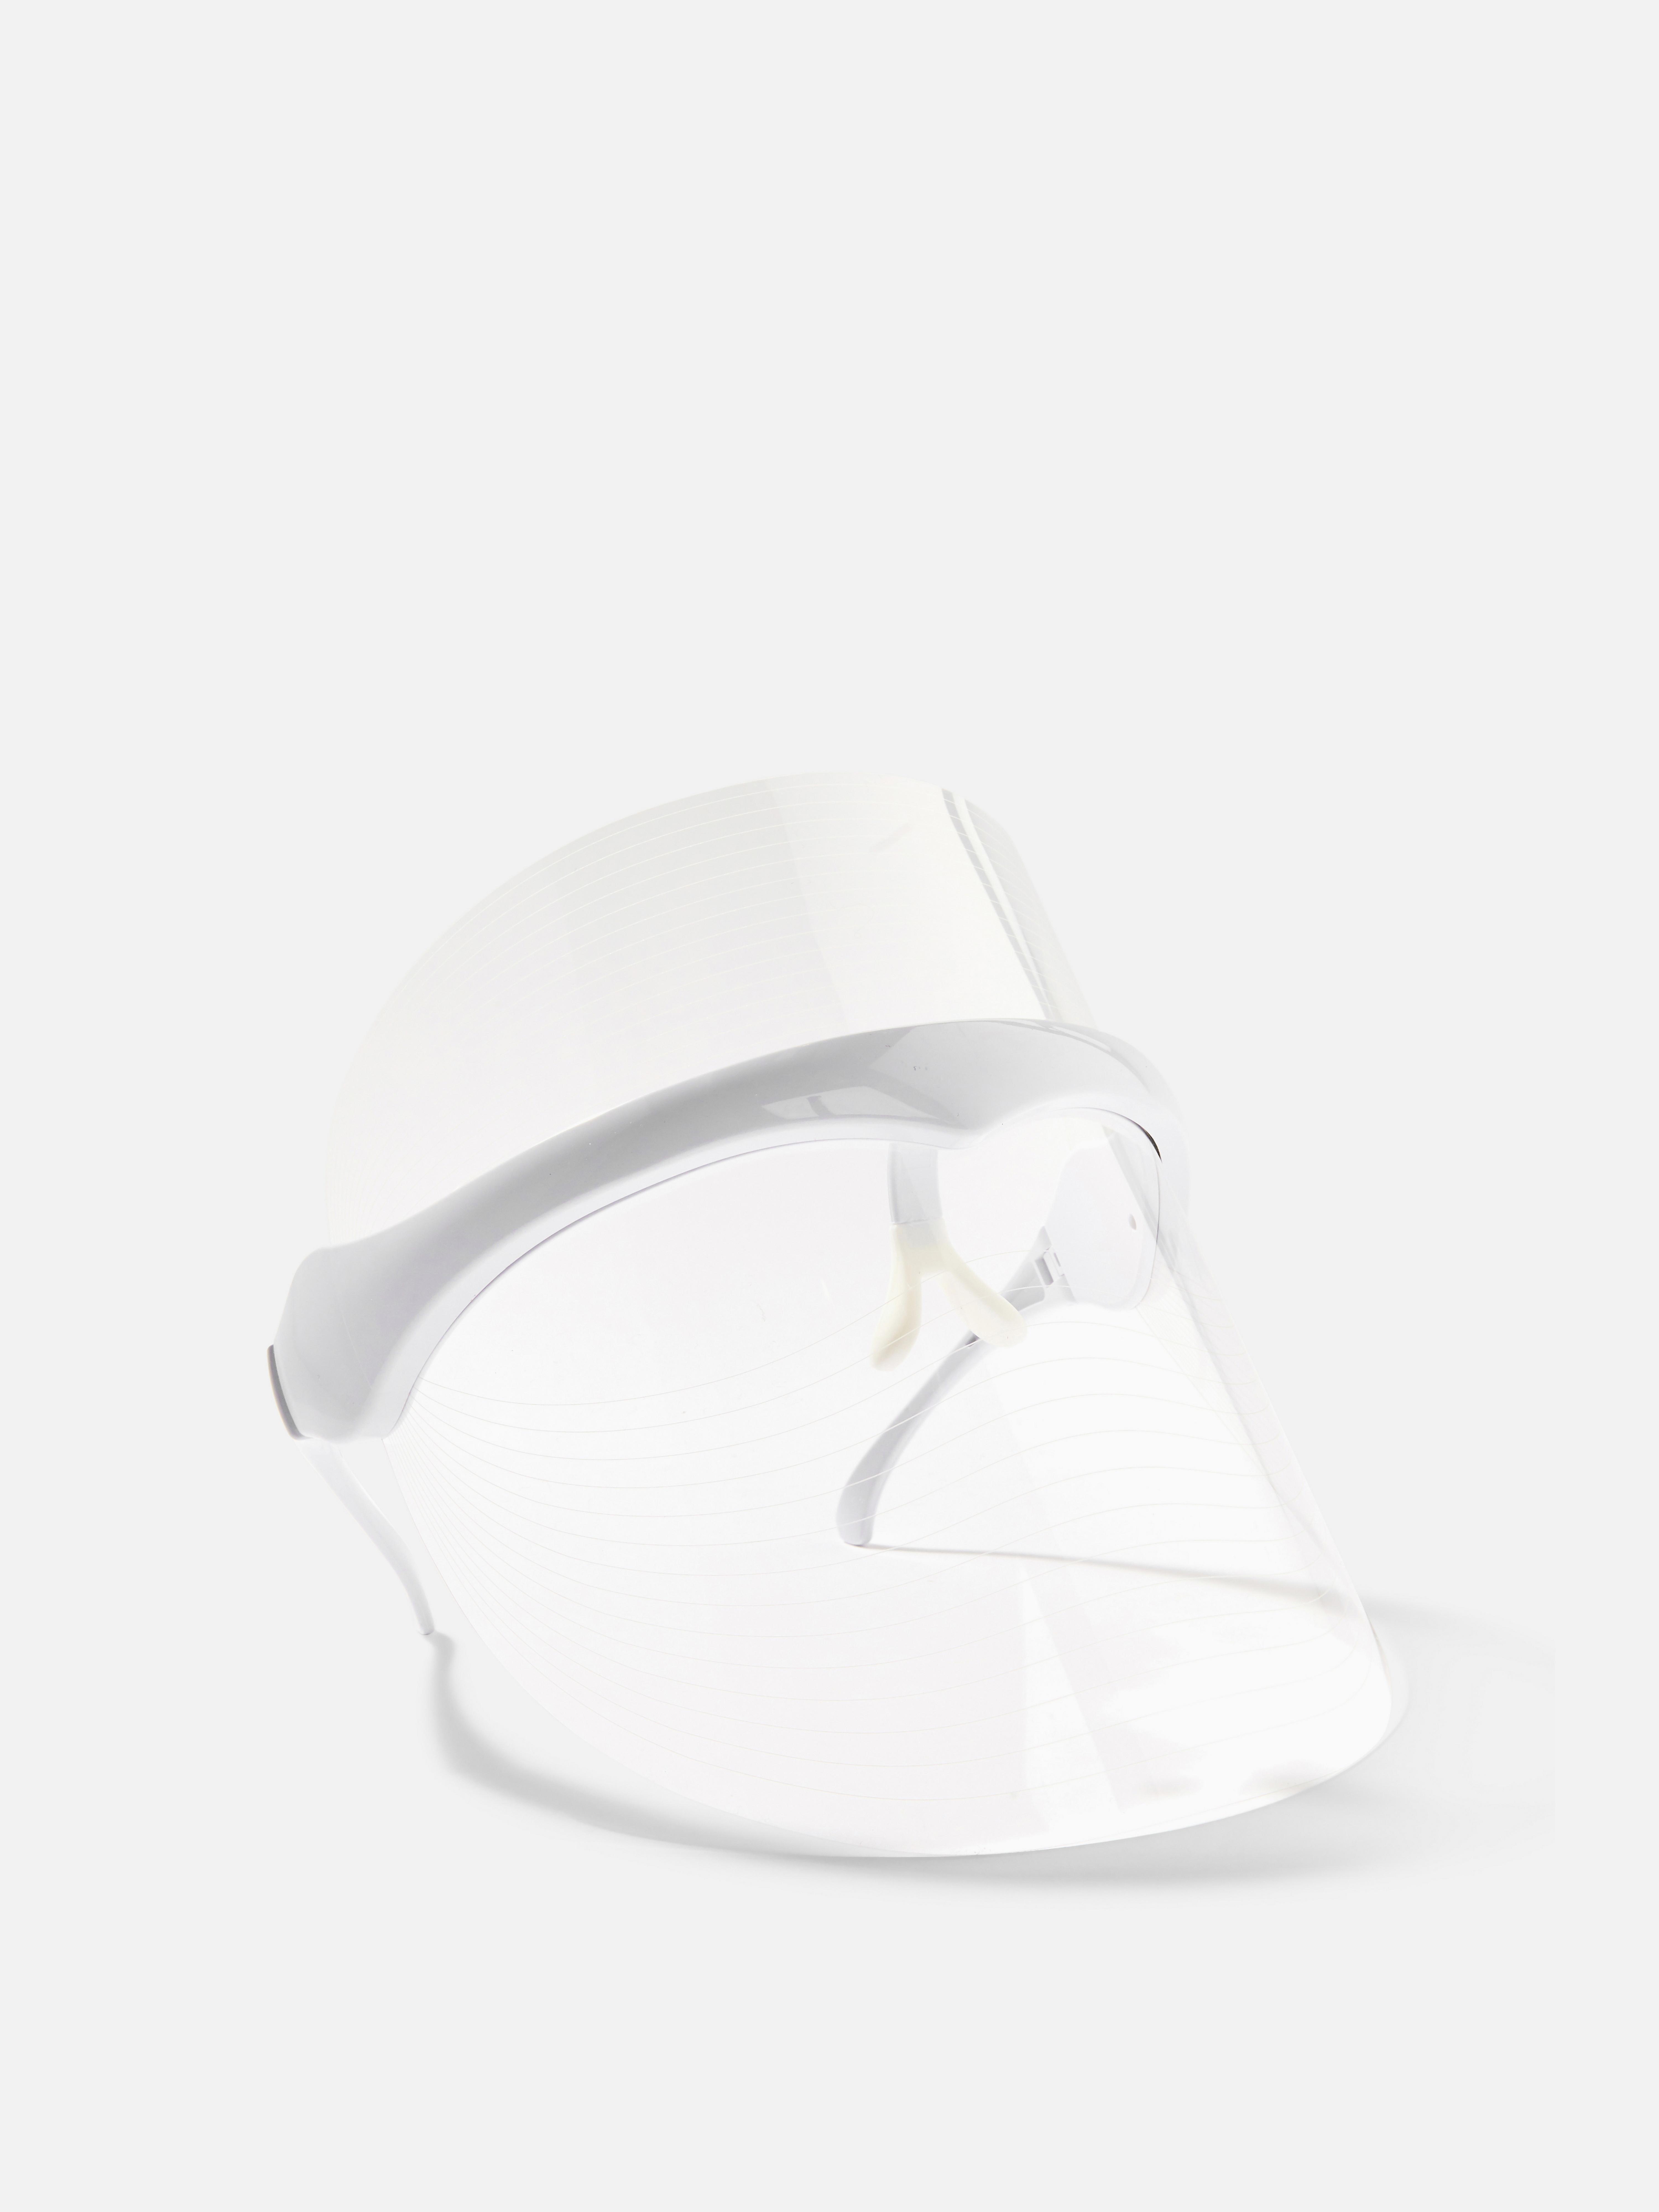 LED Light Therapy Mask